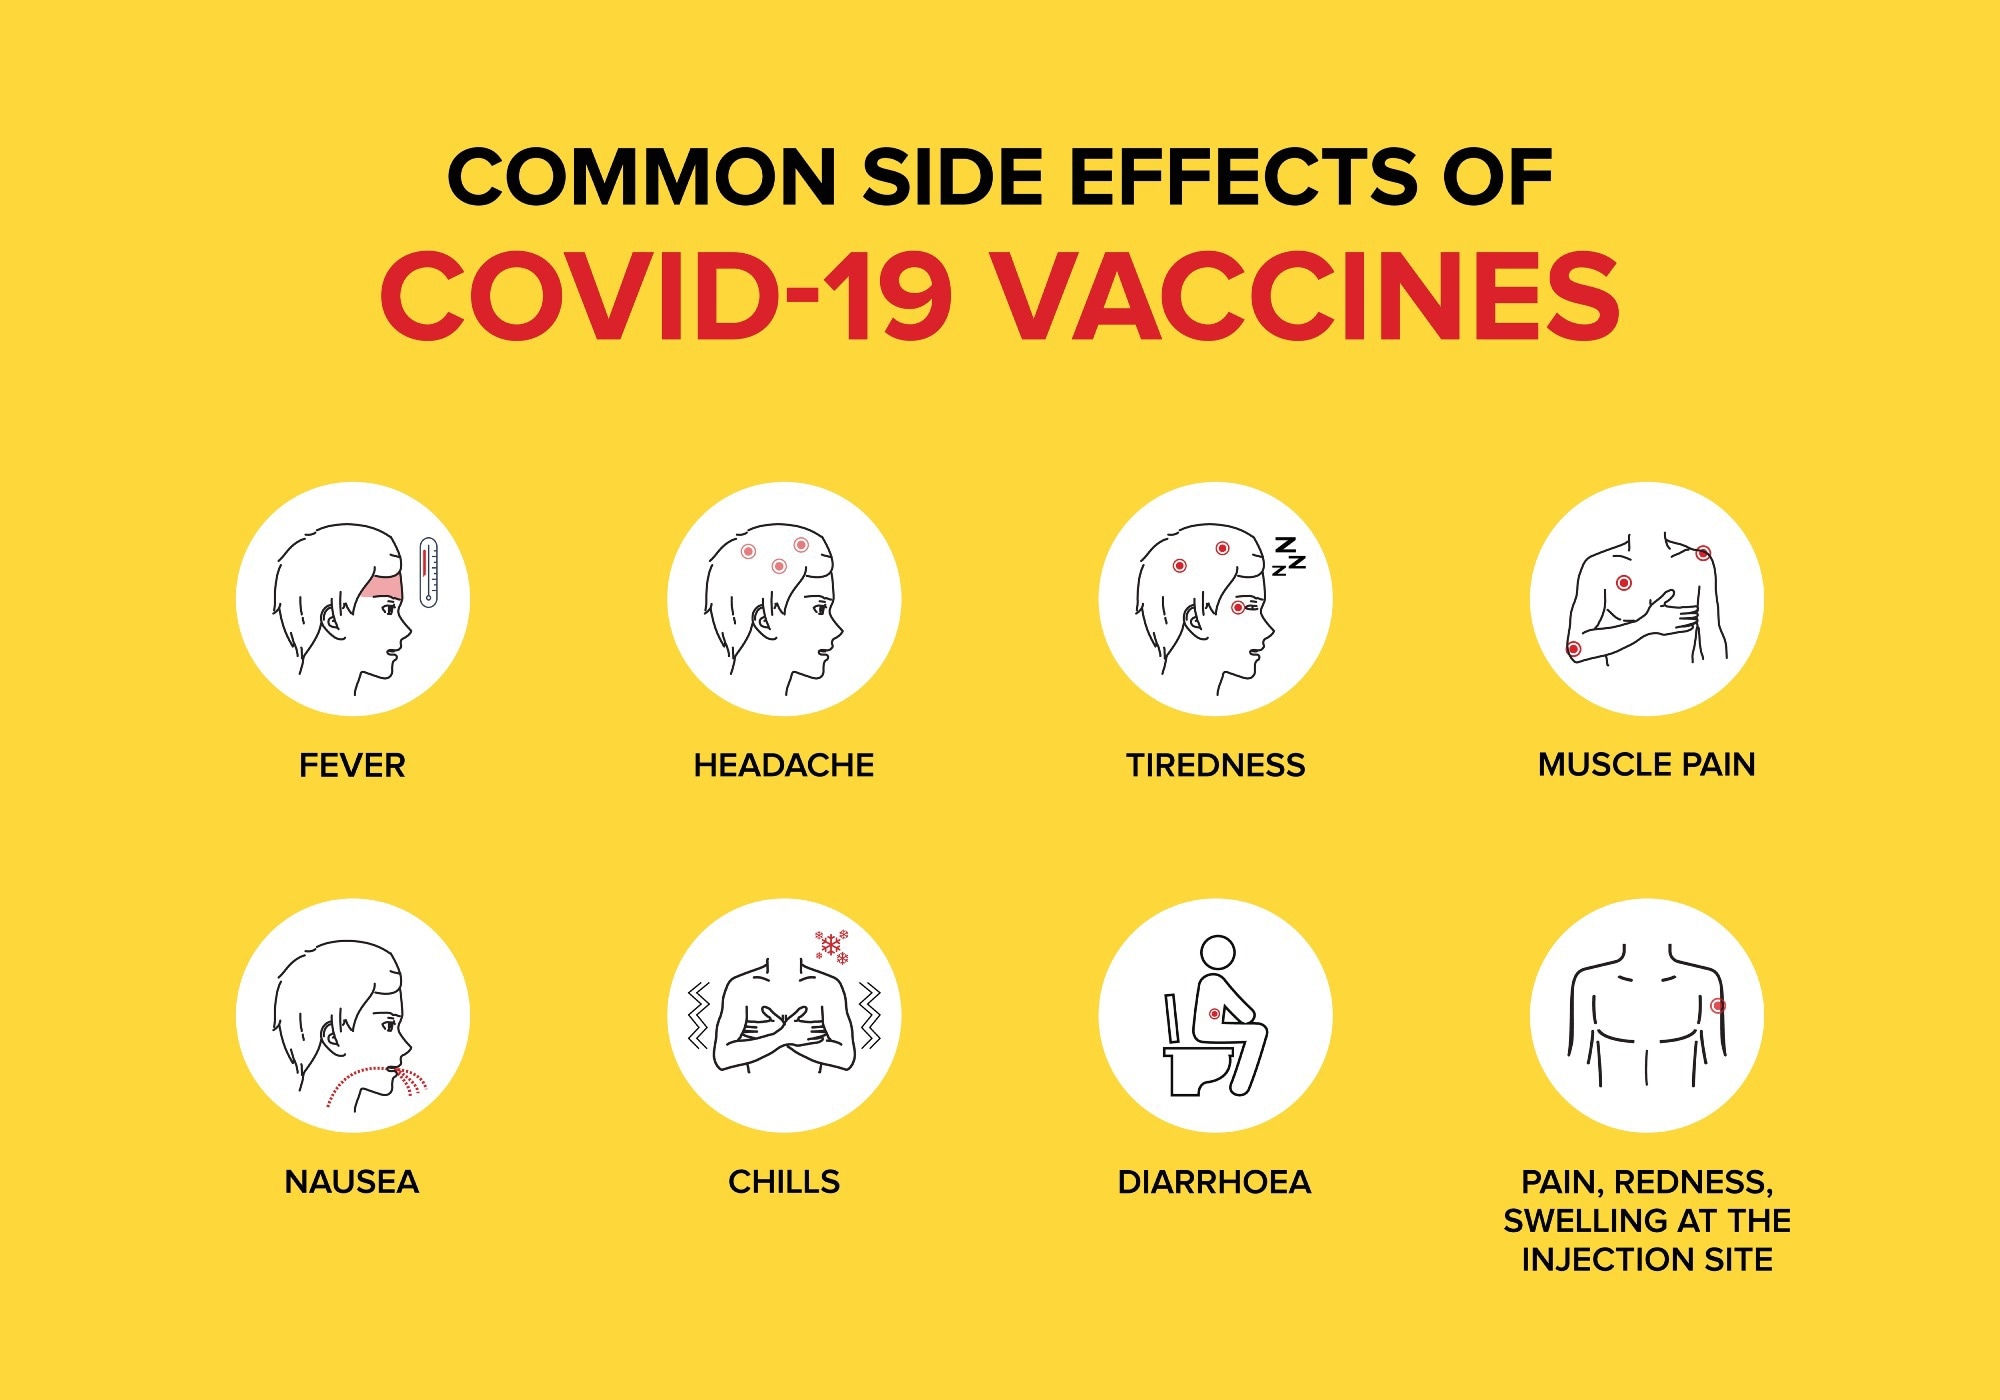 Study: Bivalent BNT162b2mRNA original/Omicron BA.4-5 booster vaccination: adverse reactions and inability to work compared to the monovalent COVID-19 booster. Image Credit: Akash Sain / Shutterstock